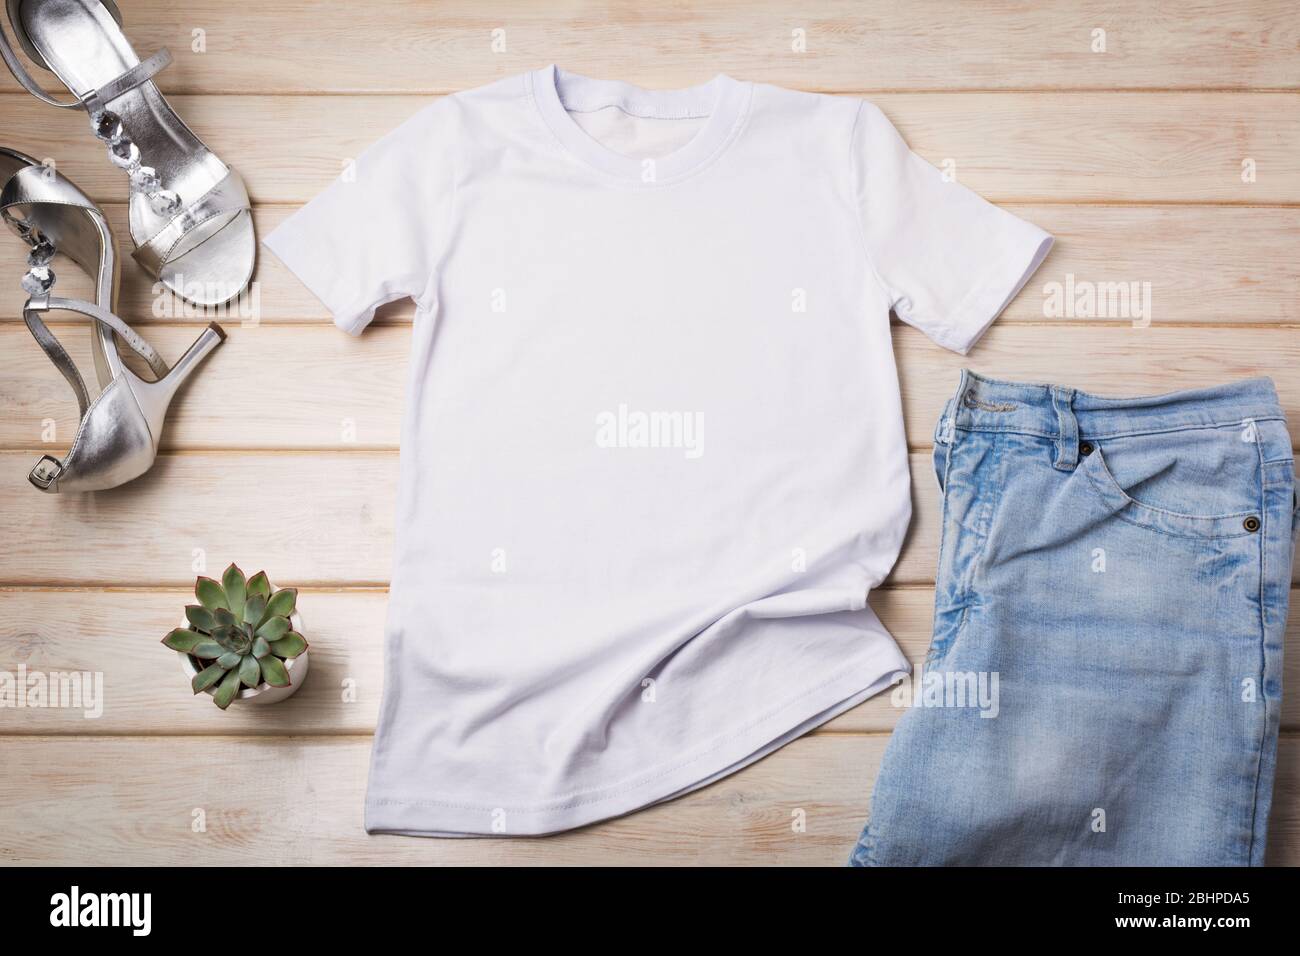 White women’s cotton T-shirt mockup with silver open toe heels sandals and succulent plant. Design t shirt template, tee print presentation mock up Stock Photo